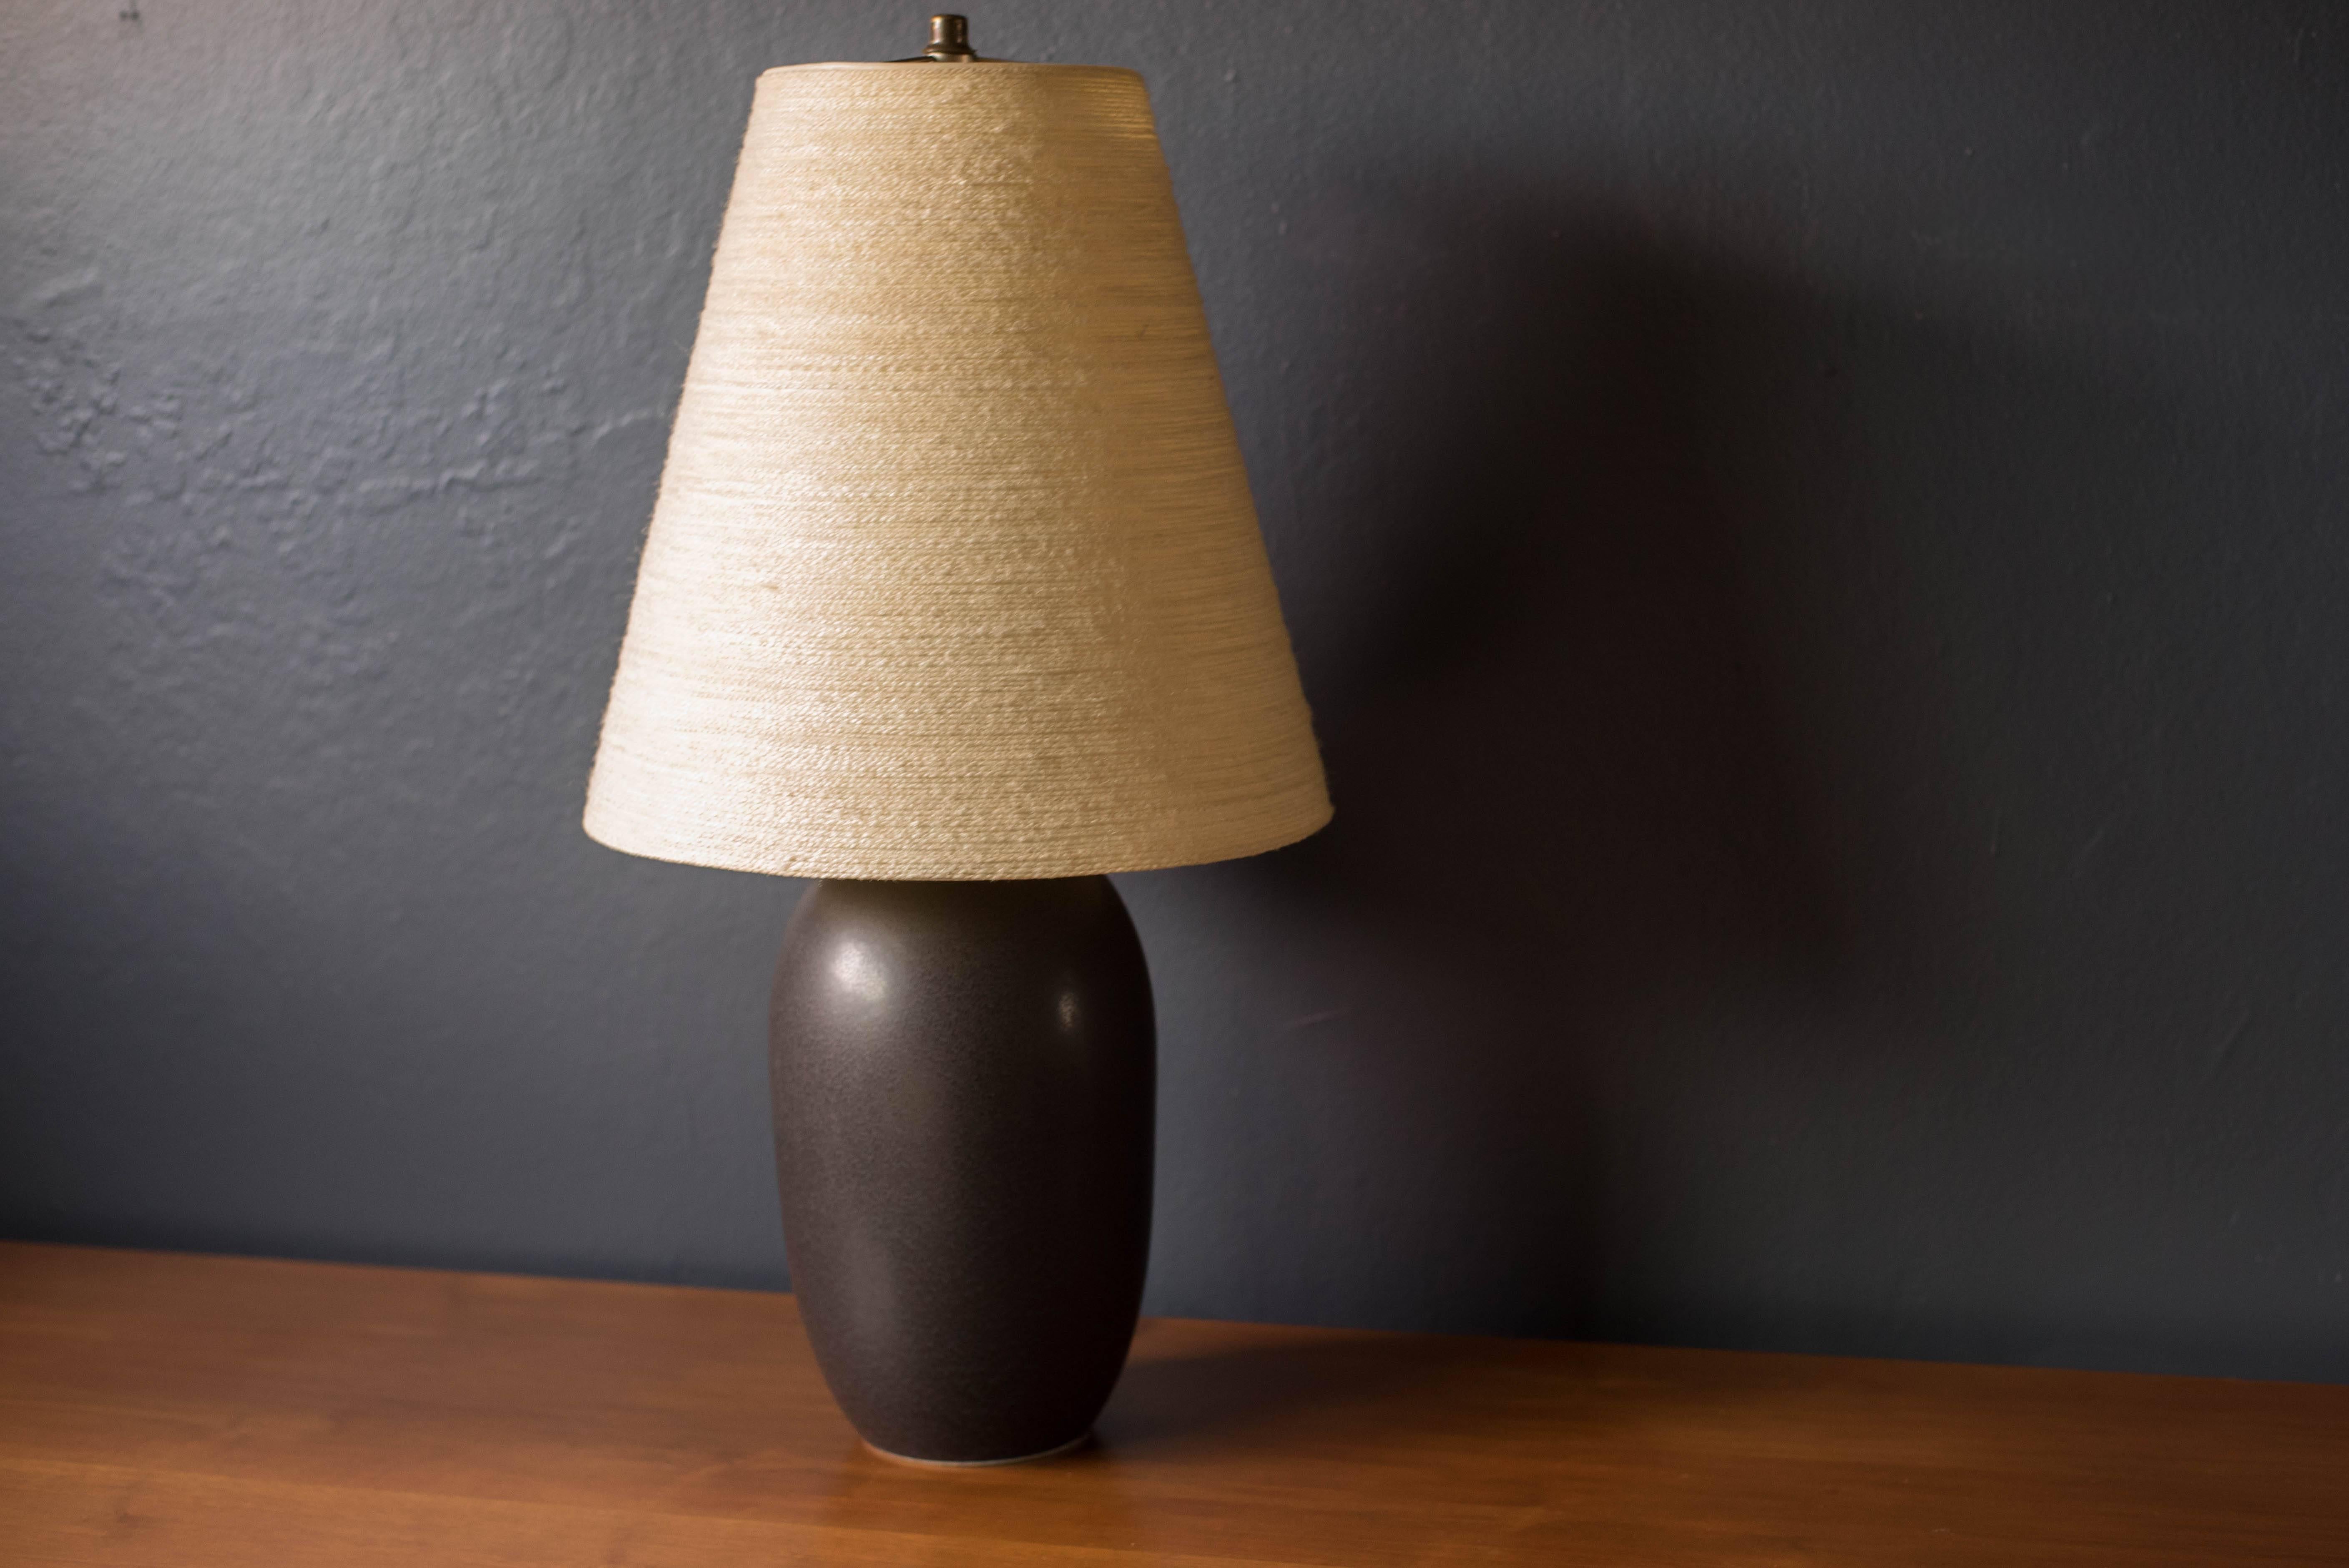 Mid-Century Modern pottery lamp by Lotte and Gunnar Bostlund. This piece features a speckled dark blue and black matte finish and includes the original fiberglass tapered shade. Functions with a three way switch.